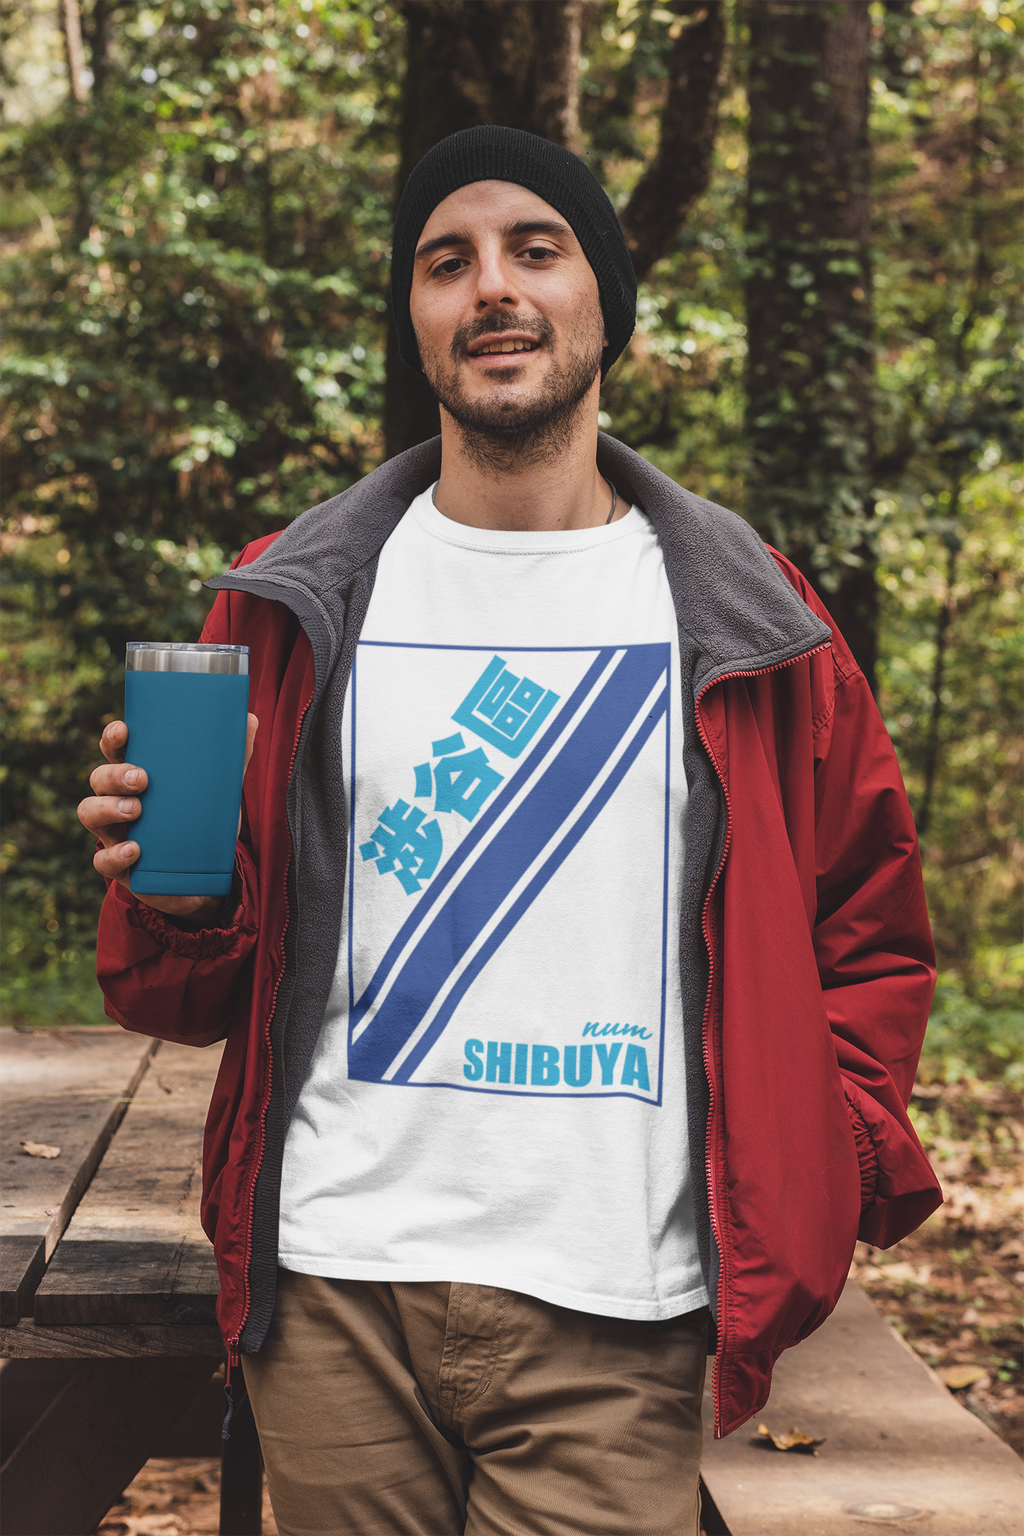 t-shirt-mockup-featuring-a-man-holding-a-20-oz-travel-mug-in-the-woods-30486.png